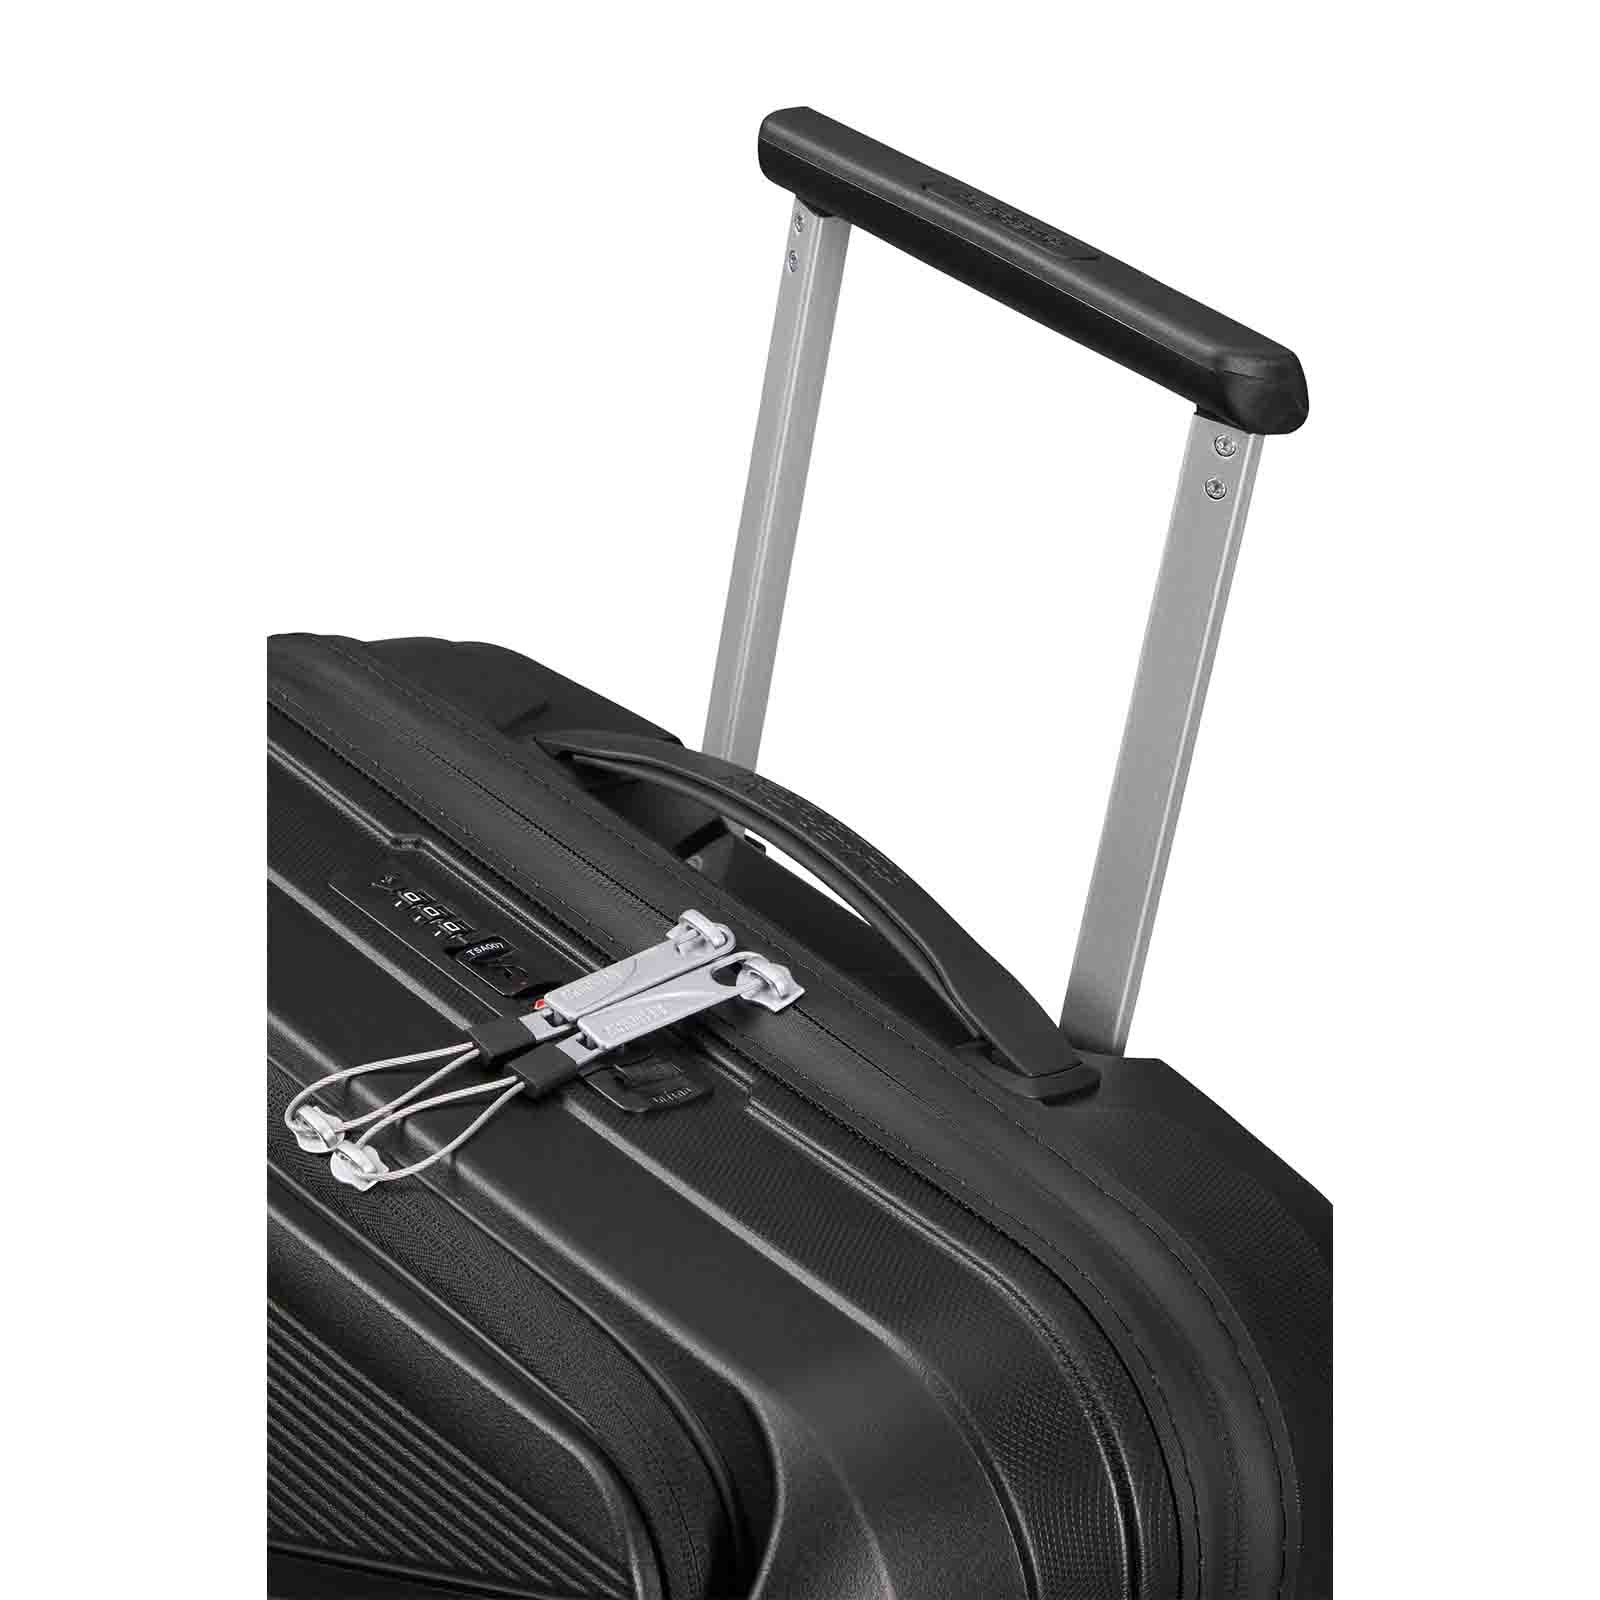 American-Tourister-Airconic-55cm-Suitcase-Front-Opening-Onyx-Black-Trolley